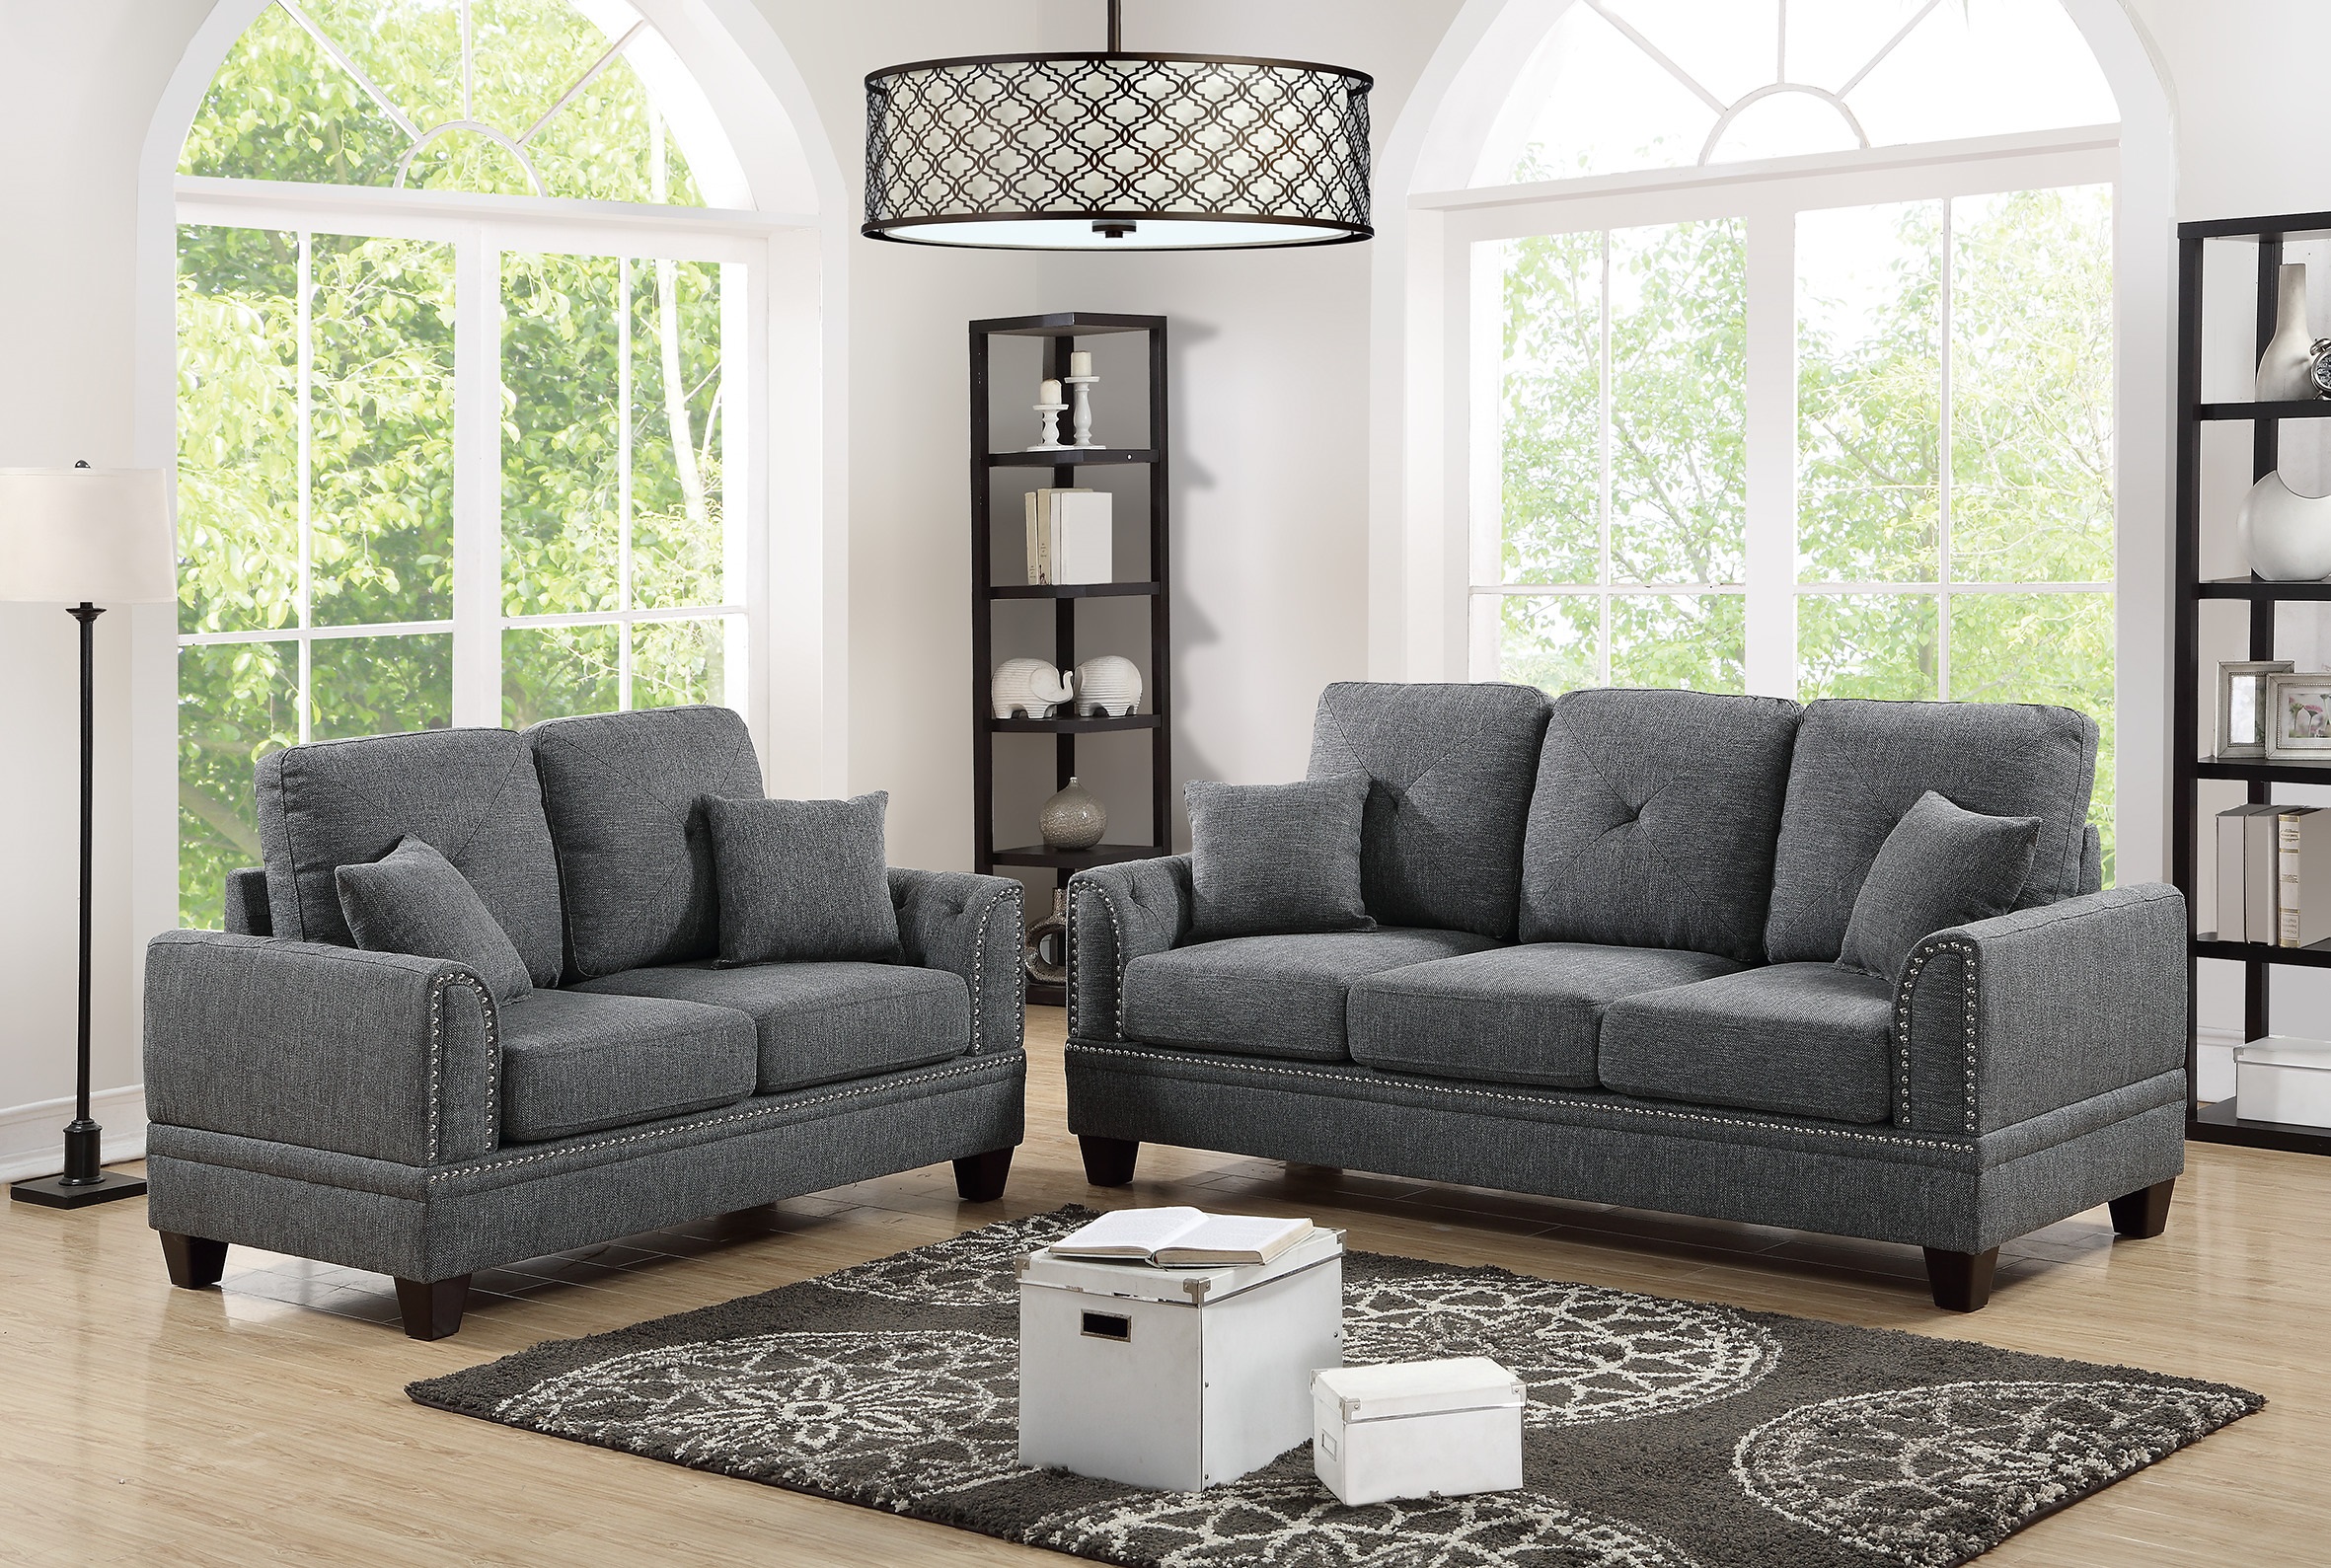 Classic Living Room Couch Furniture Sofa And Loveseat Ash Black Blended Fabric 2pc Sofa Set-Boyel Living